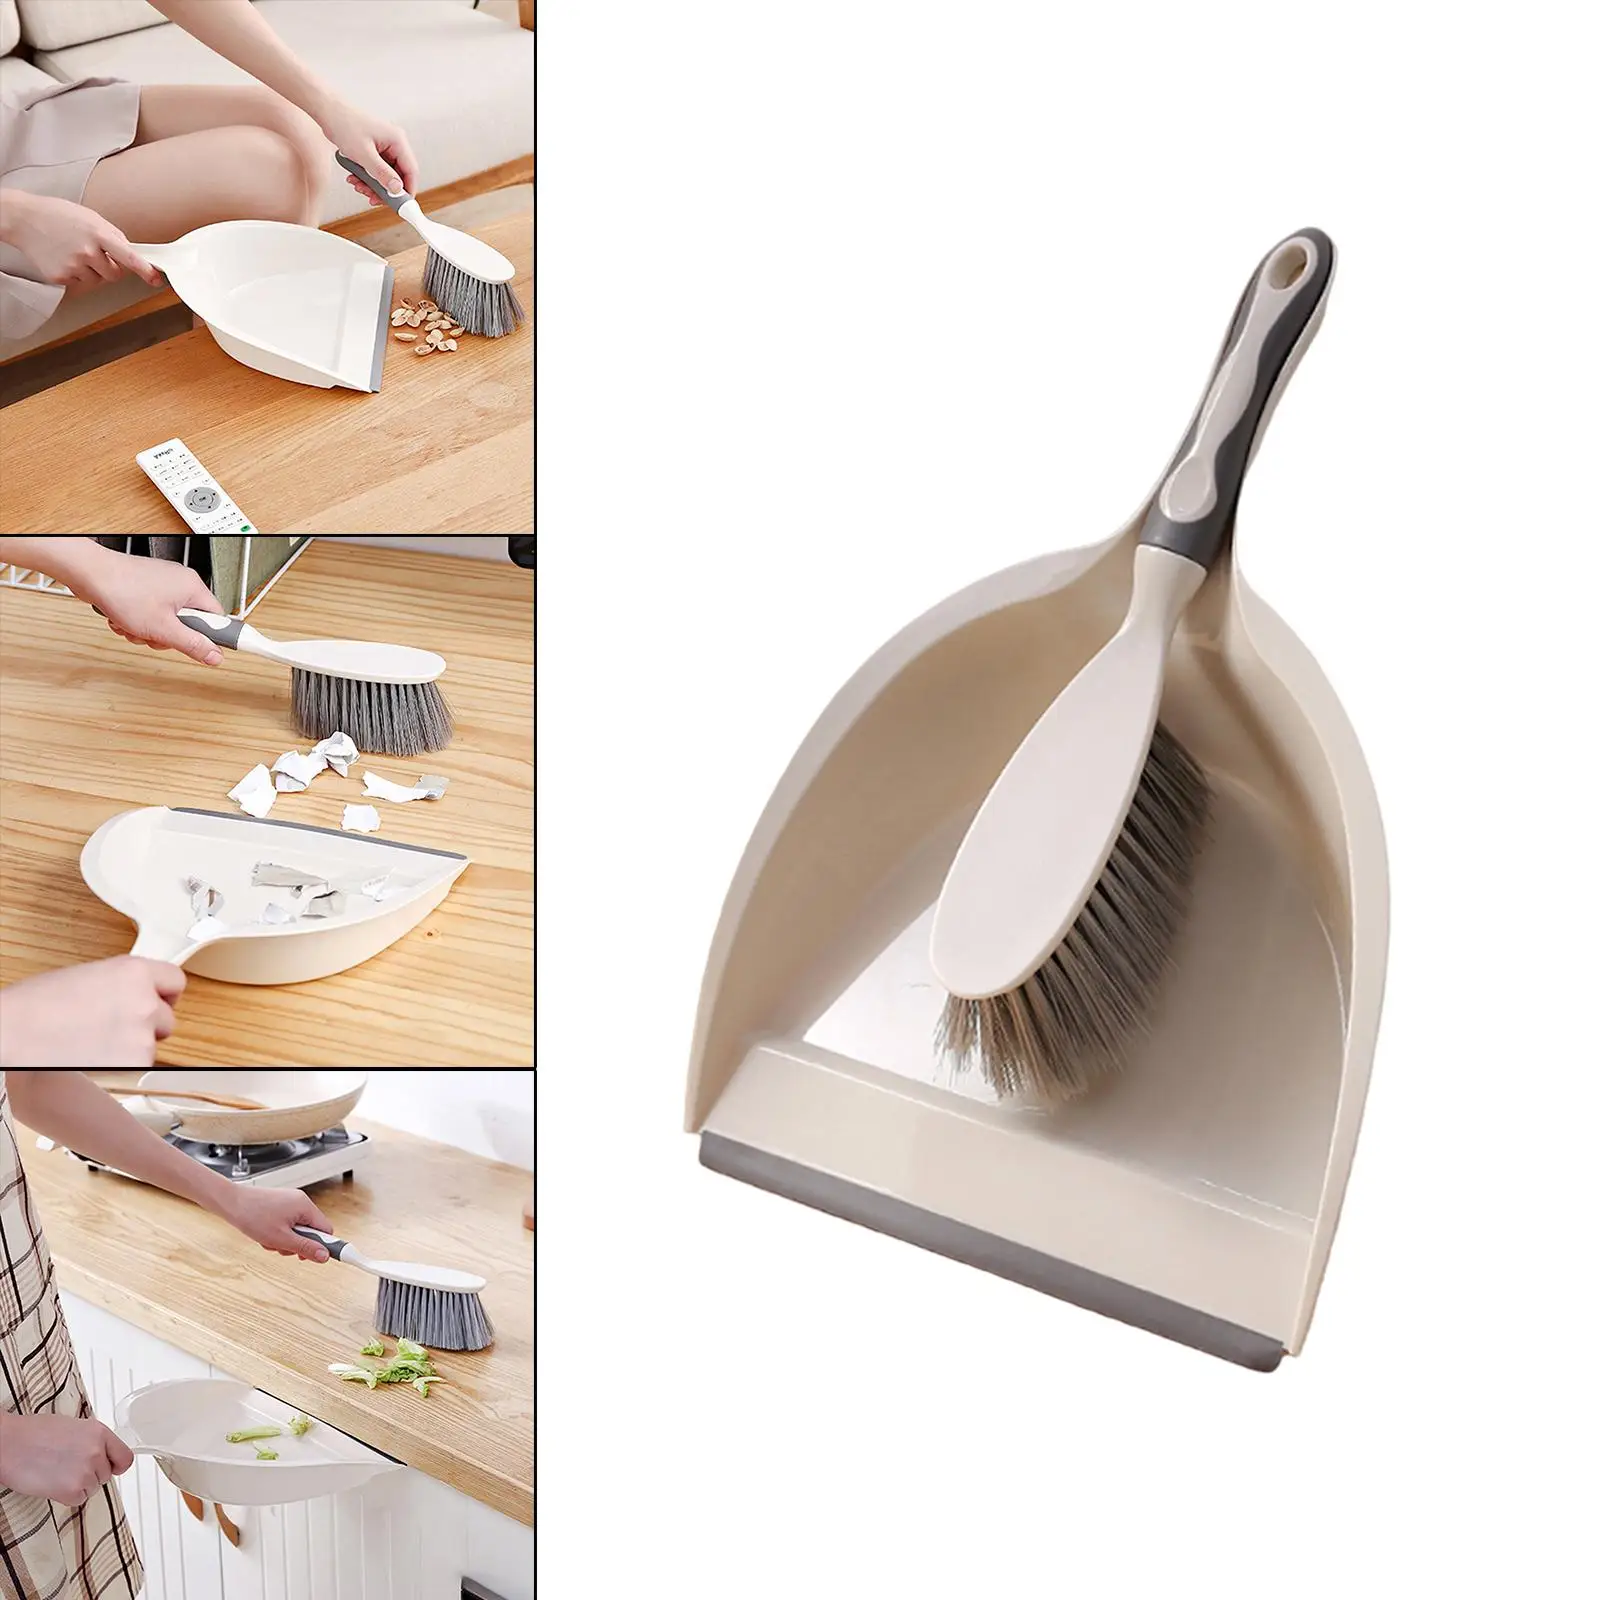 Dust Pans with Brush Whisk Broom Rubber Edge Collect Dust Cleaning Tool Bristles Brush for Desk Countertop Key Board and Car 